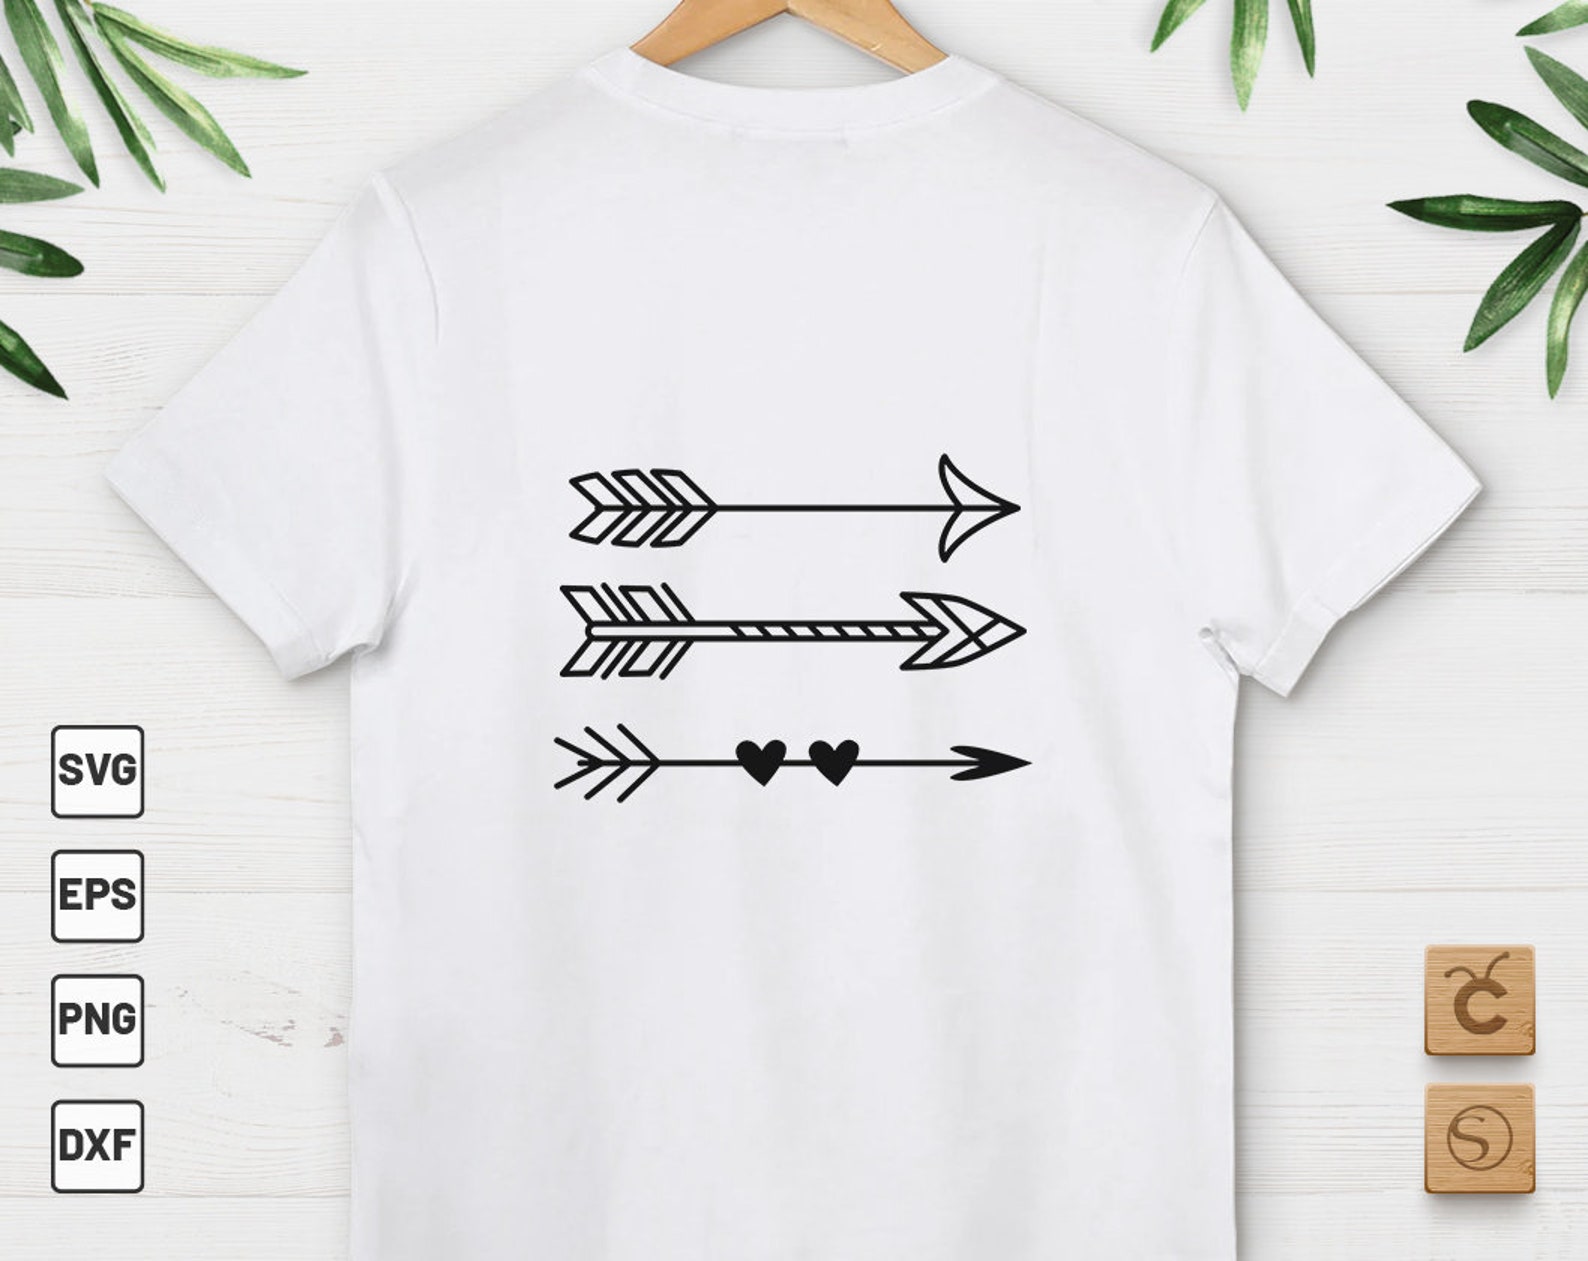 Arrows for different purposes. White t-shirt with arrow.